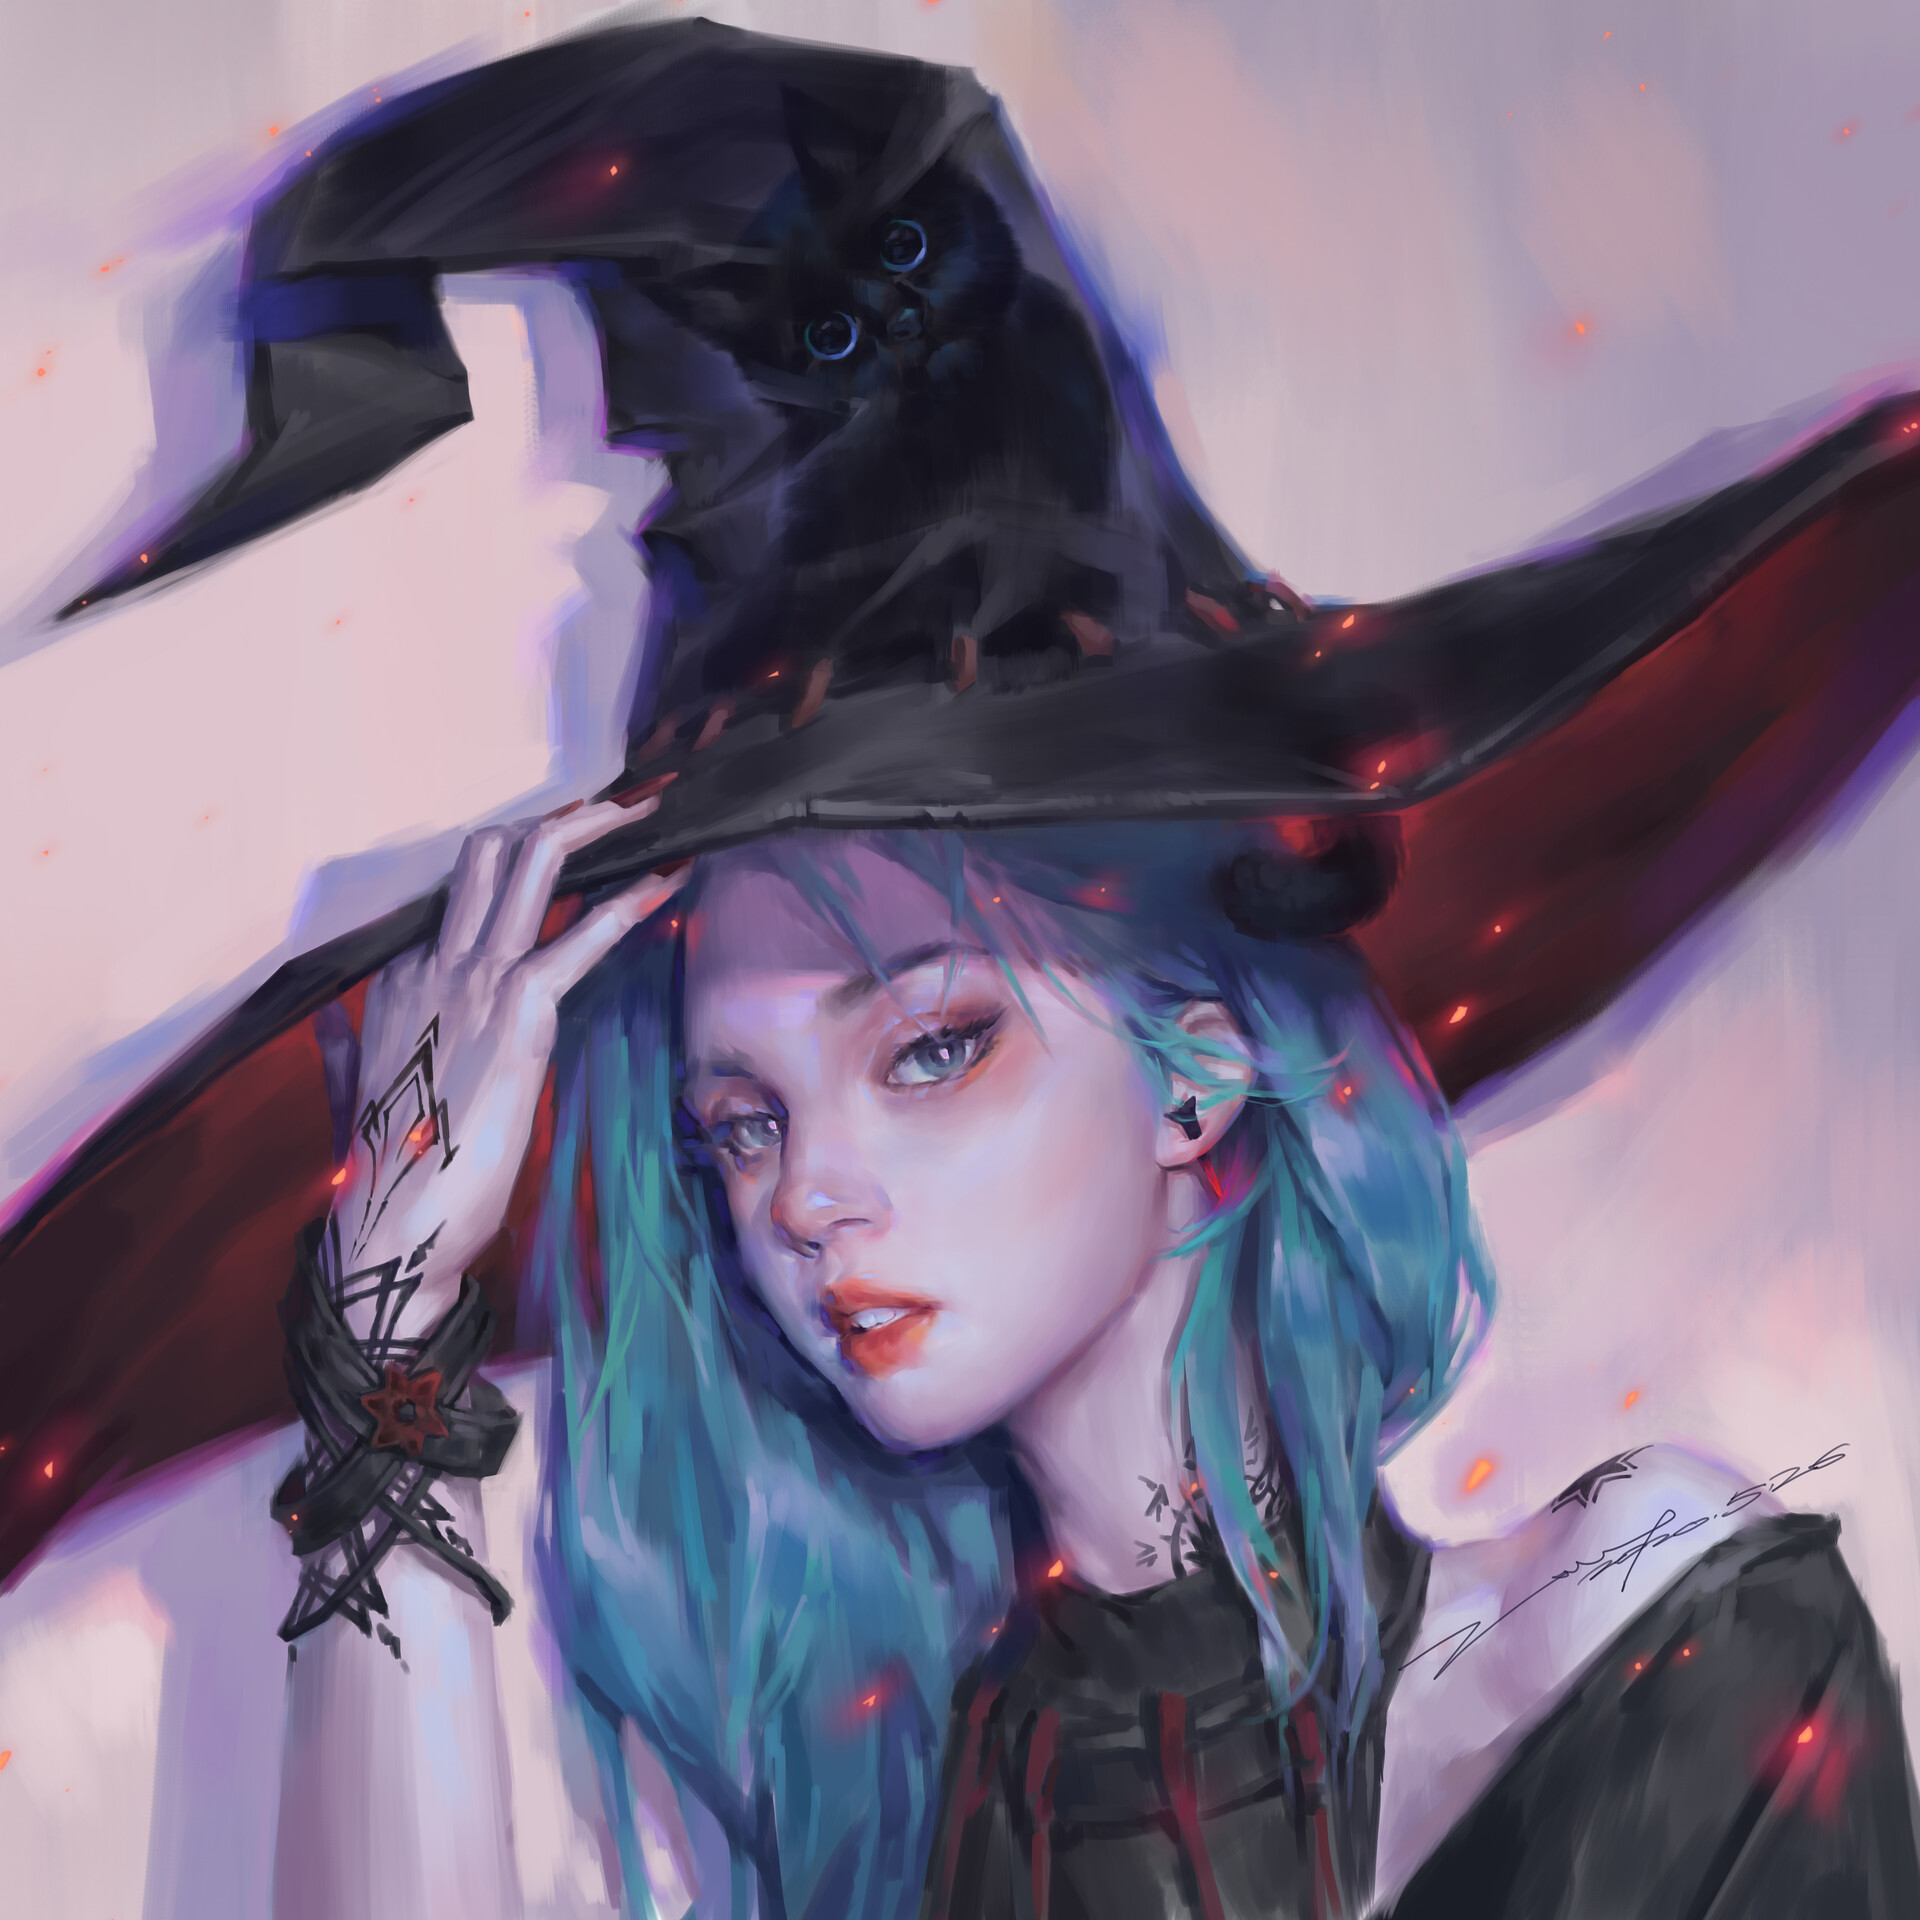 General 1920x1920 Z WY looking at viewer open mouth blue hair bracelets women with hats face hat simple background portrait tattoo digital art artwork drawing ArtStation witch hat